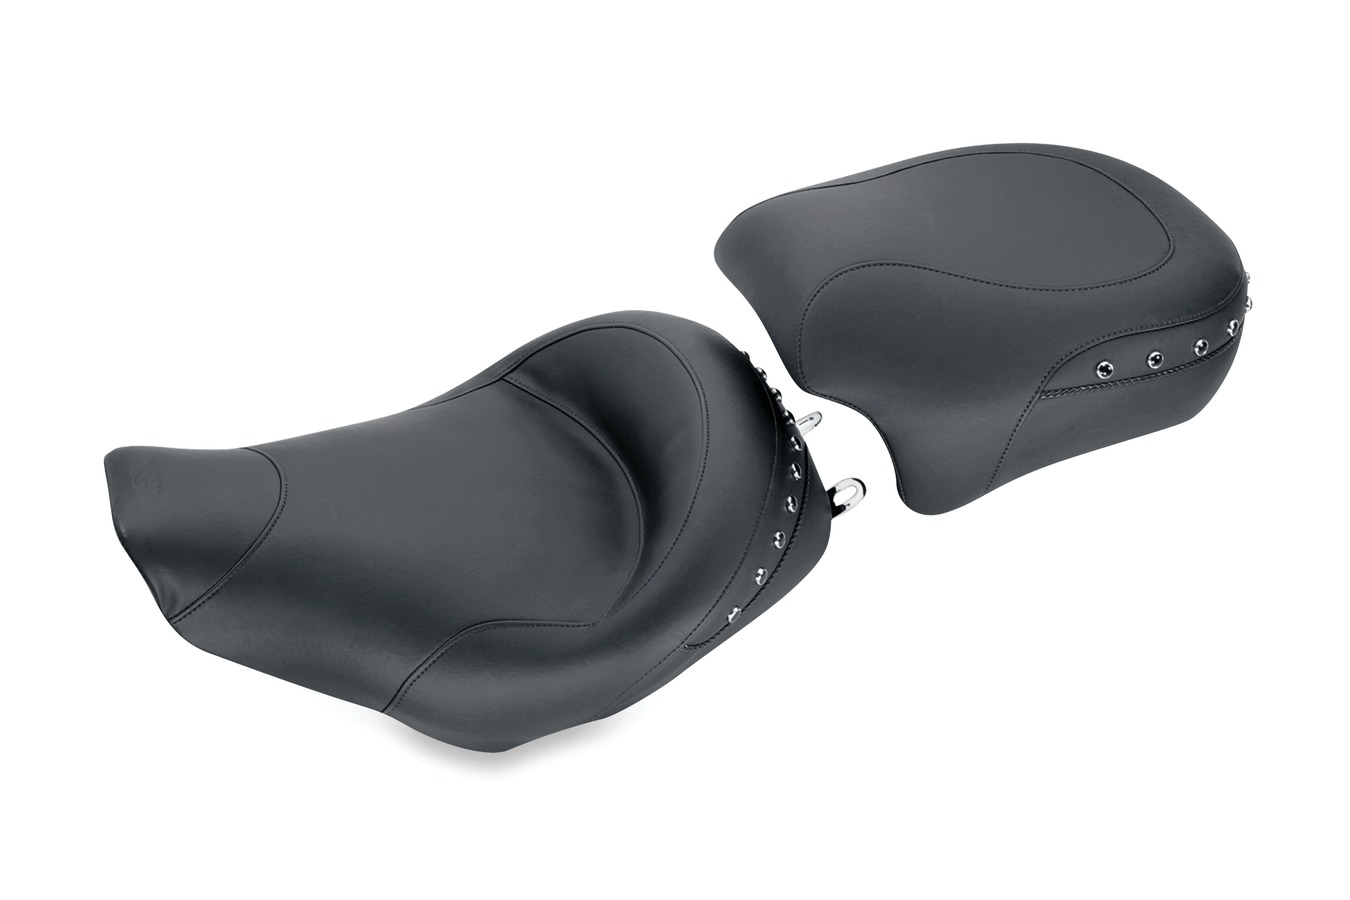 Standard Touring Solo Seat for Harley-Davidson Road King 1997-